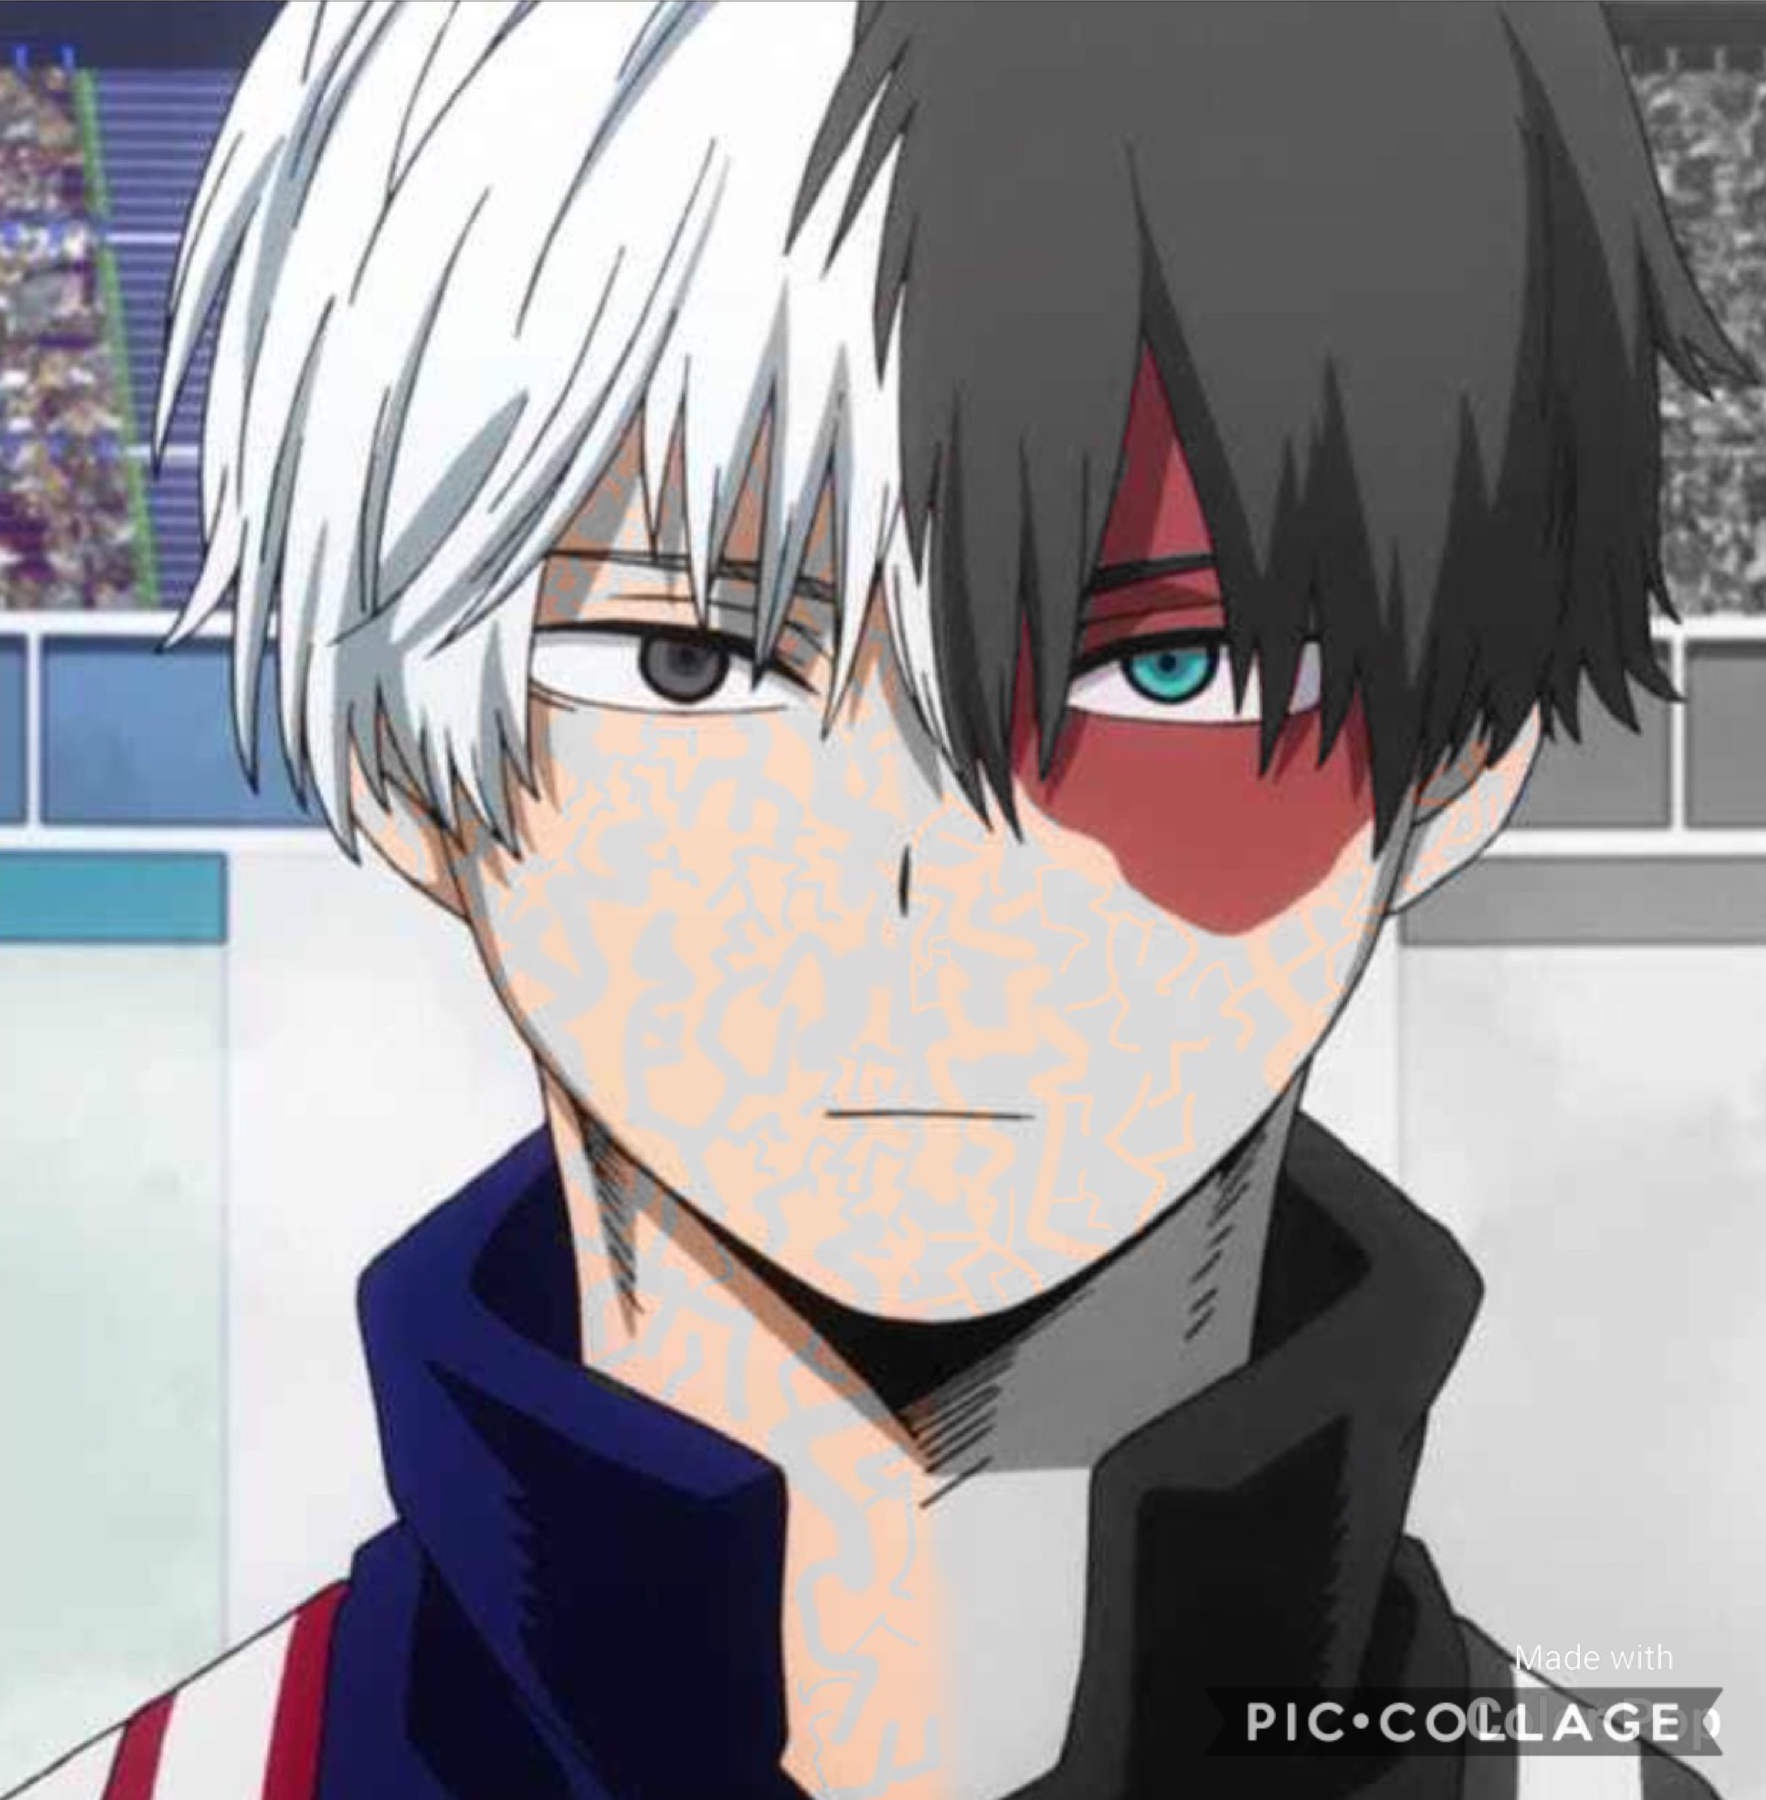 I made this of Shoto Todoroki on Color Pop!